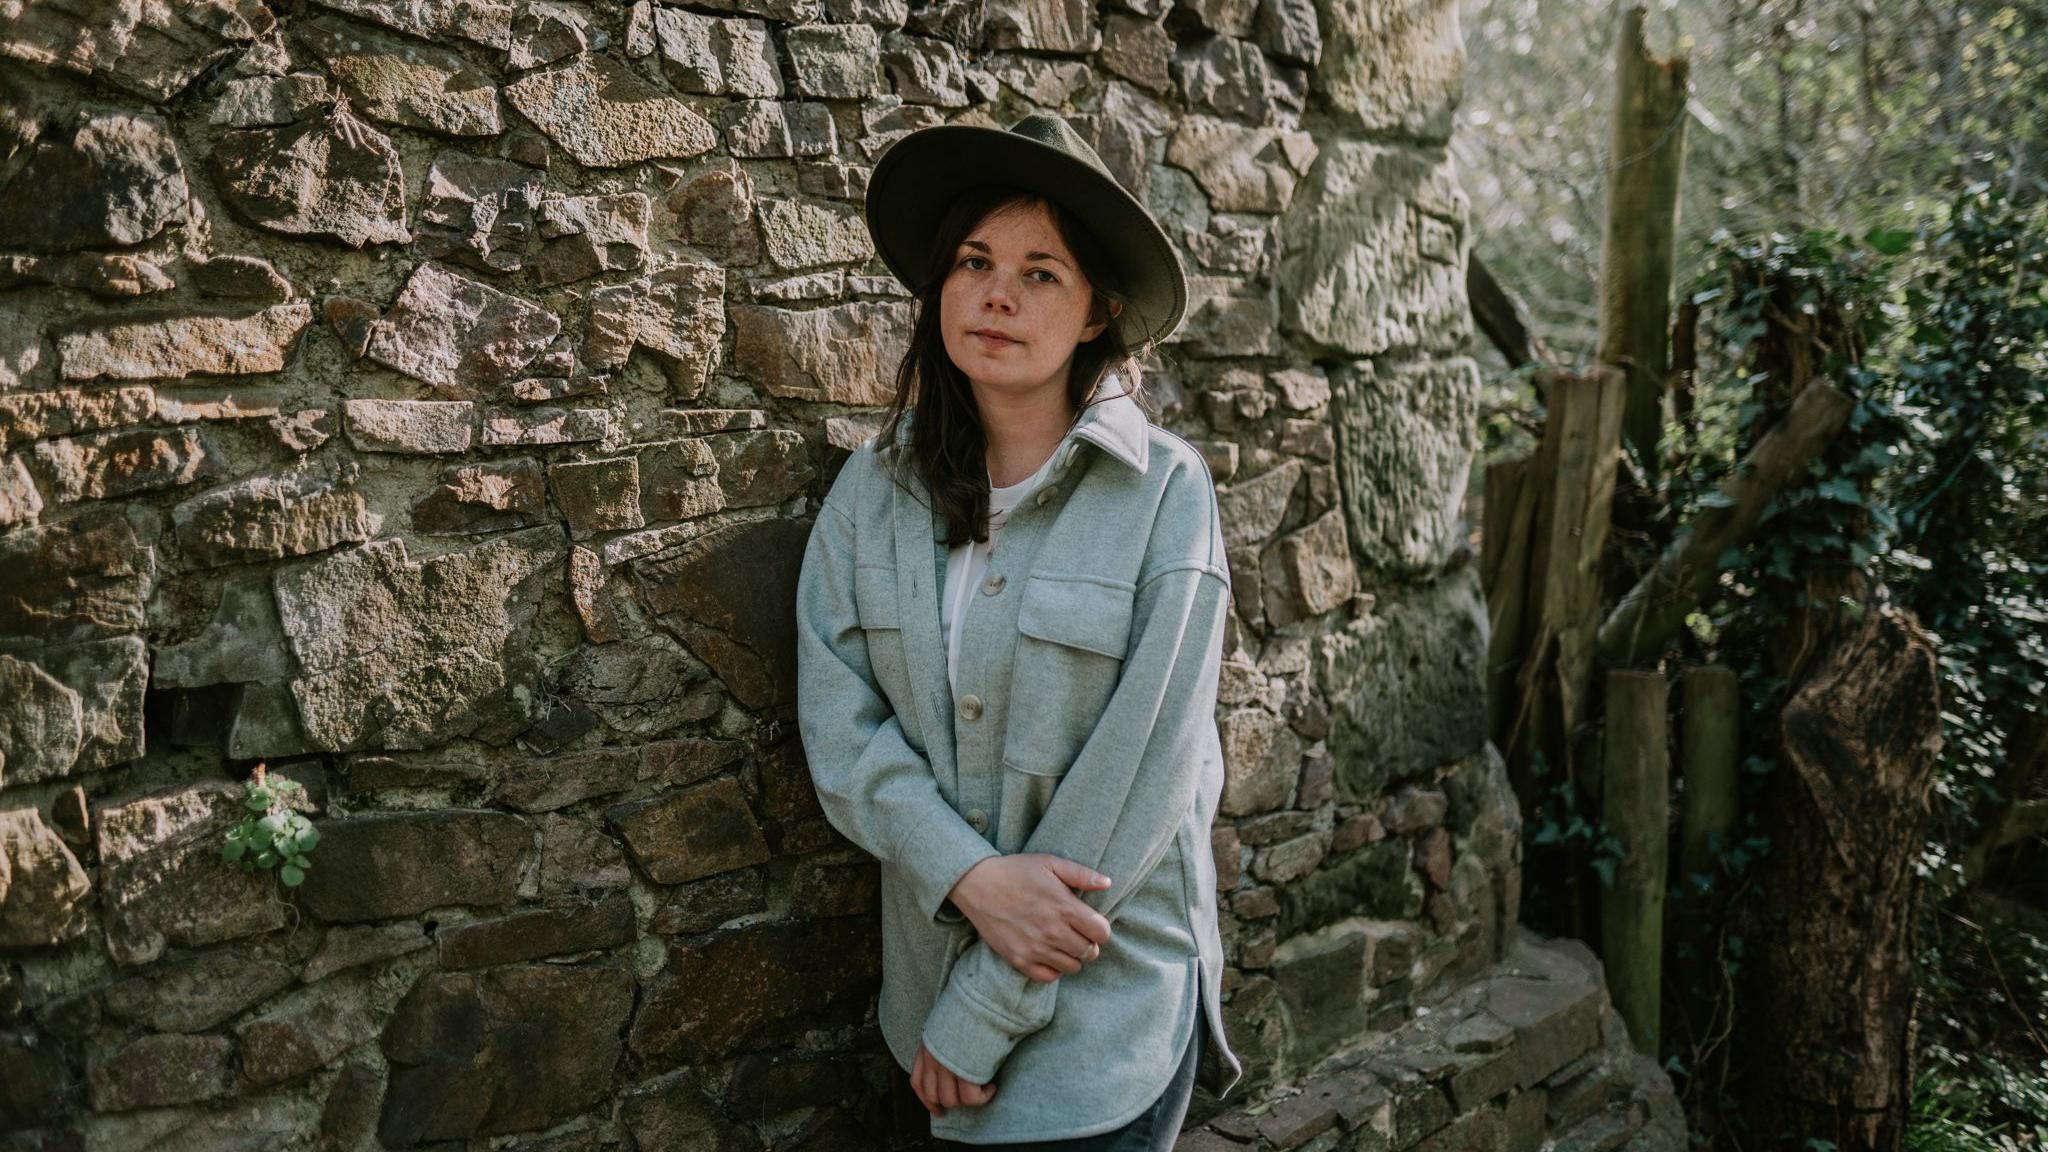 Jessie Reid in front of an old brick wall and she is wearing a blue coat and a wide-brimmed hat